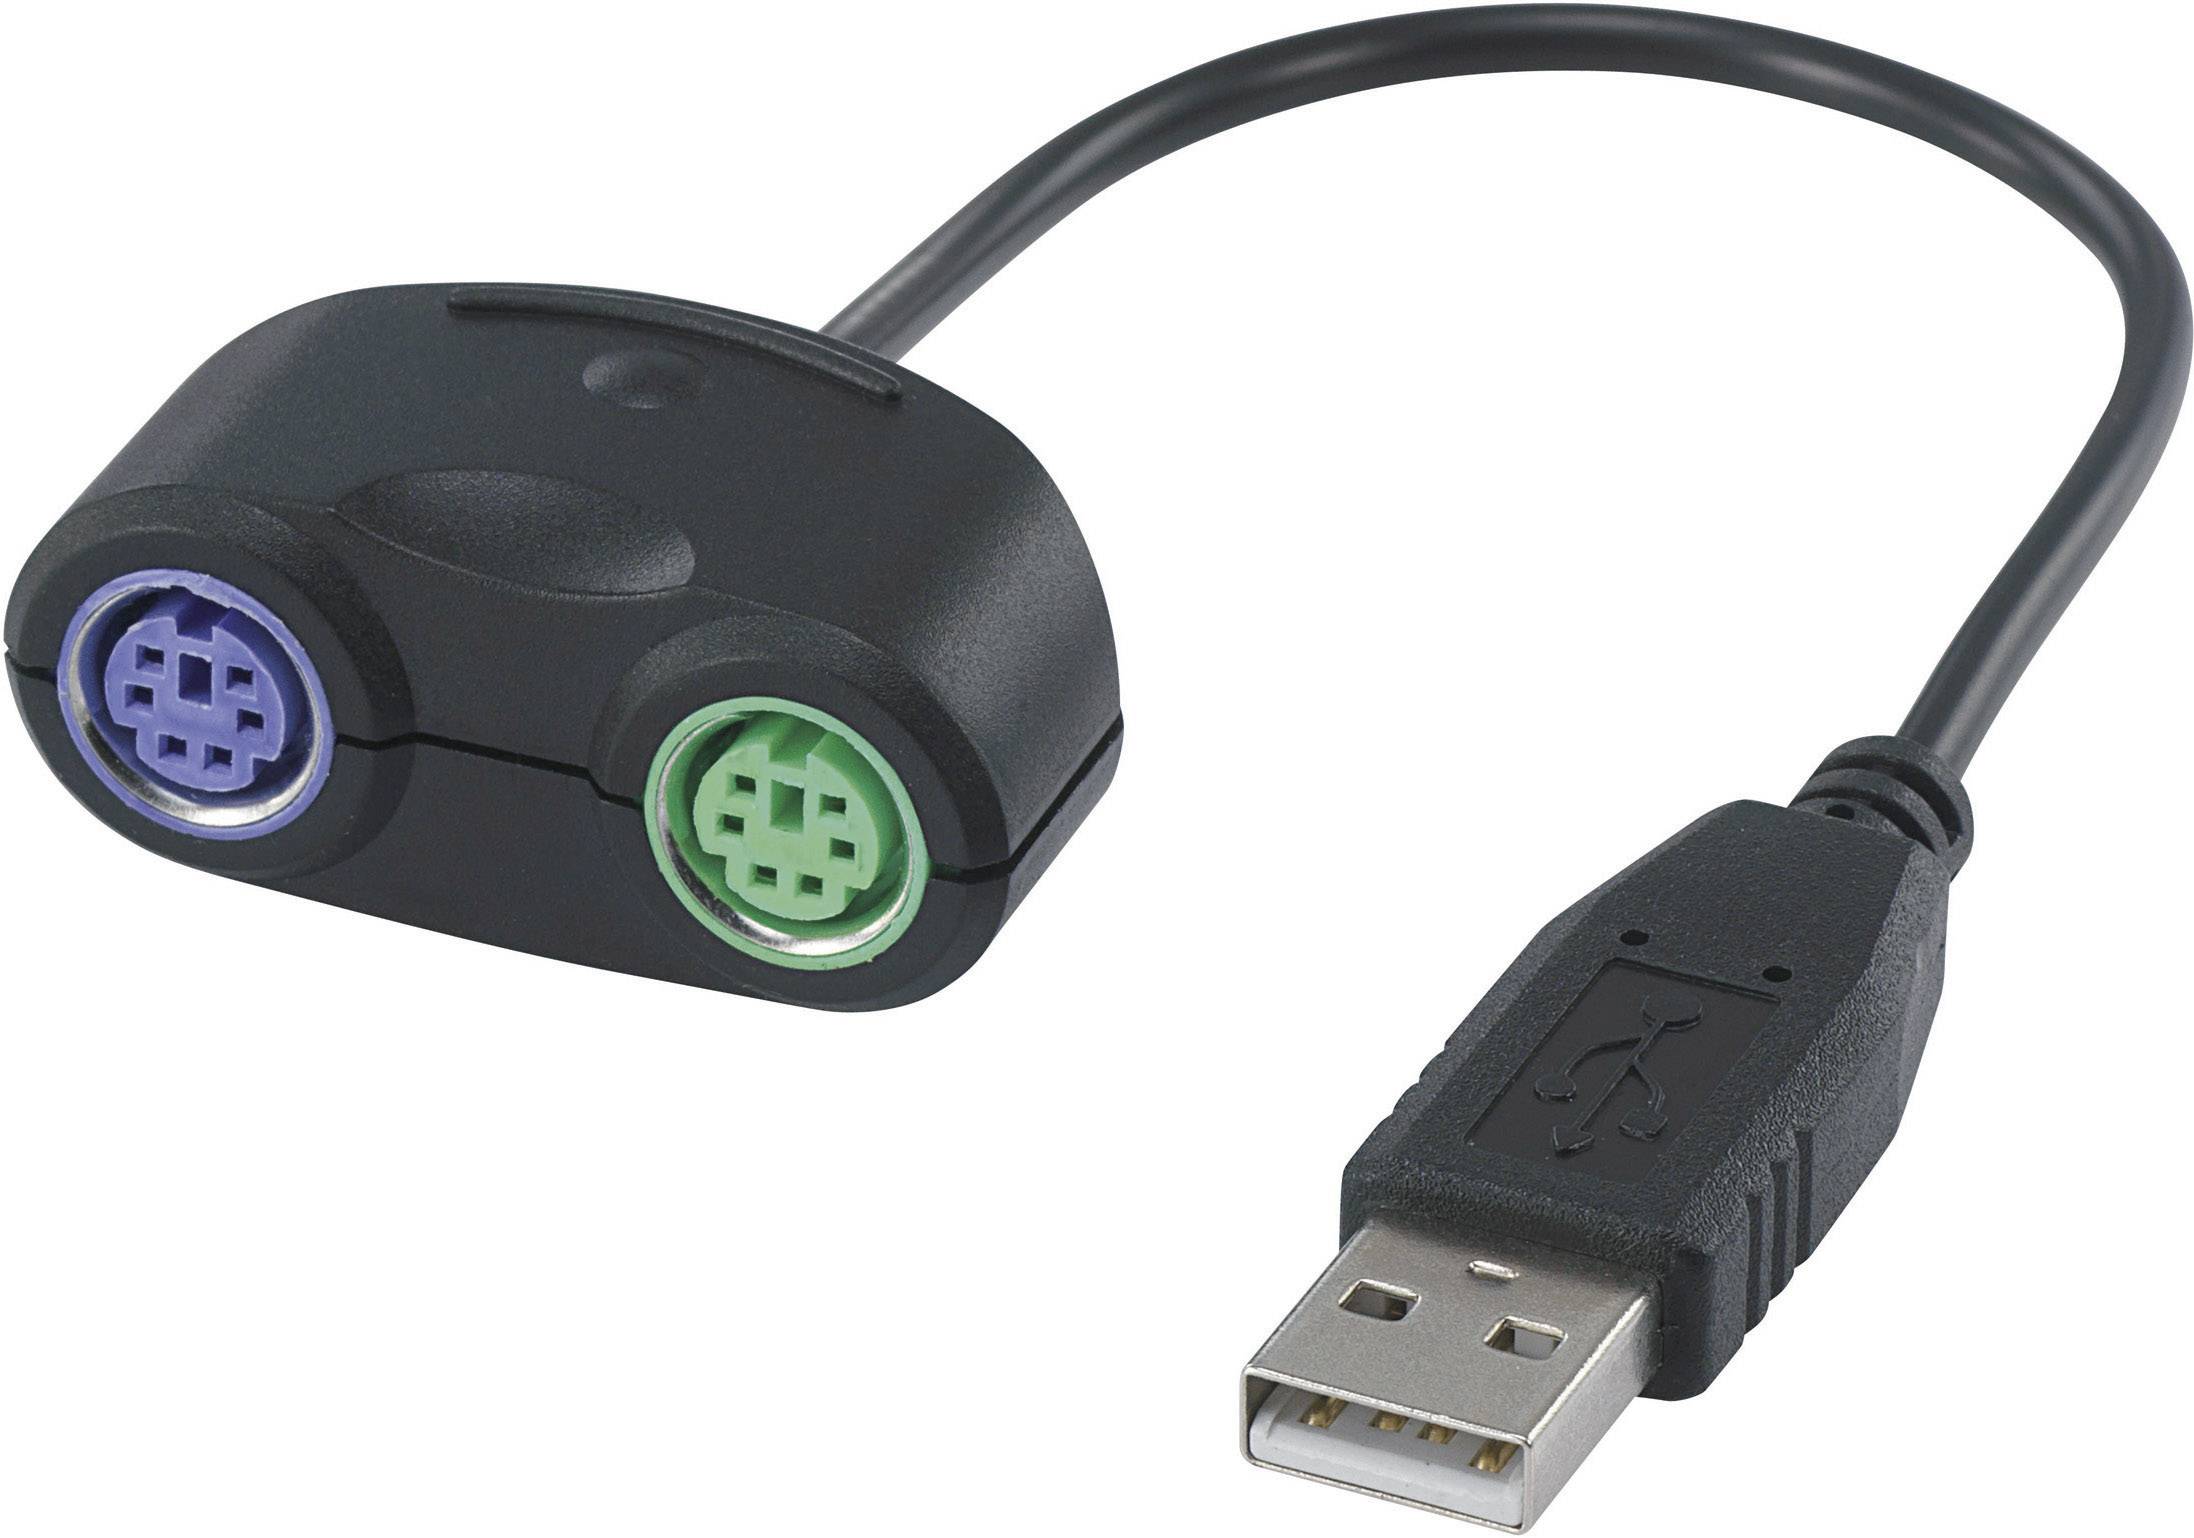 usb to playstation 2 adapter